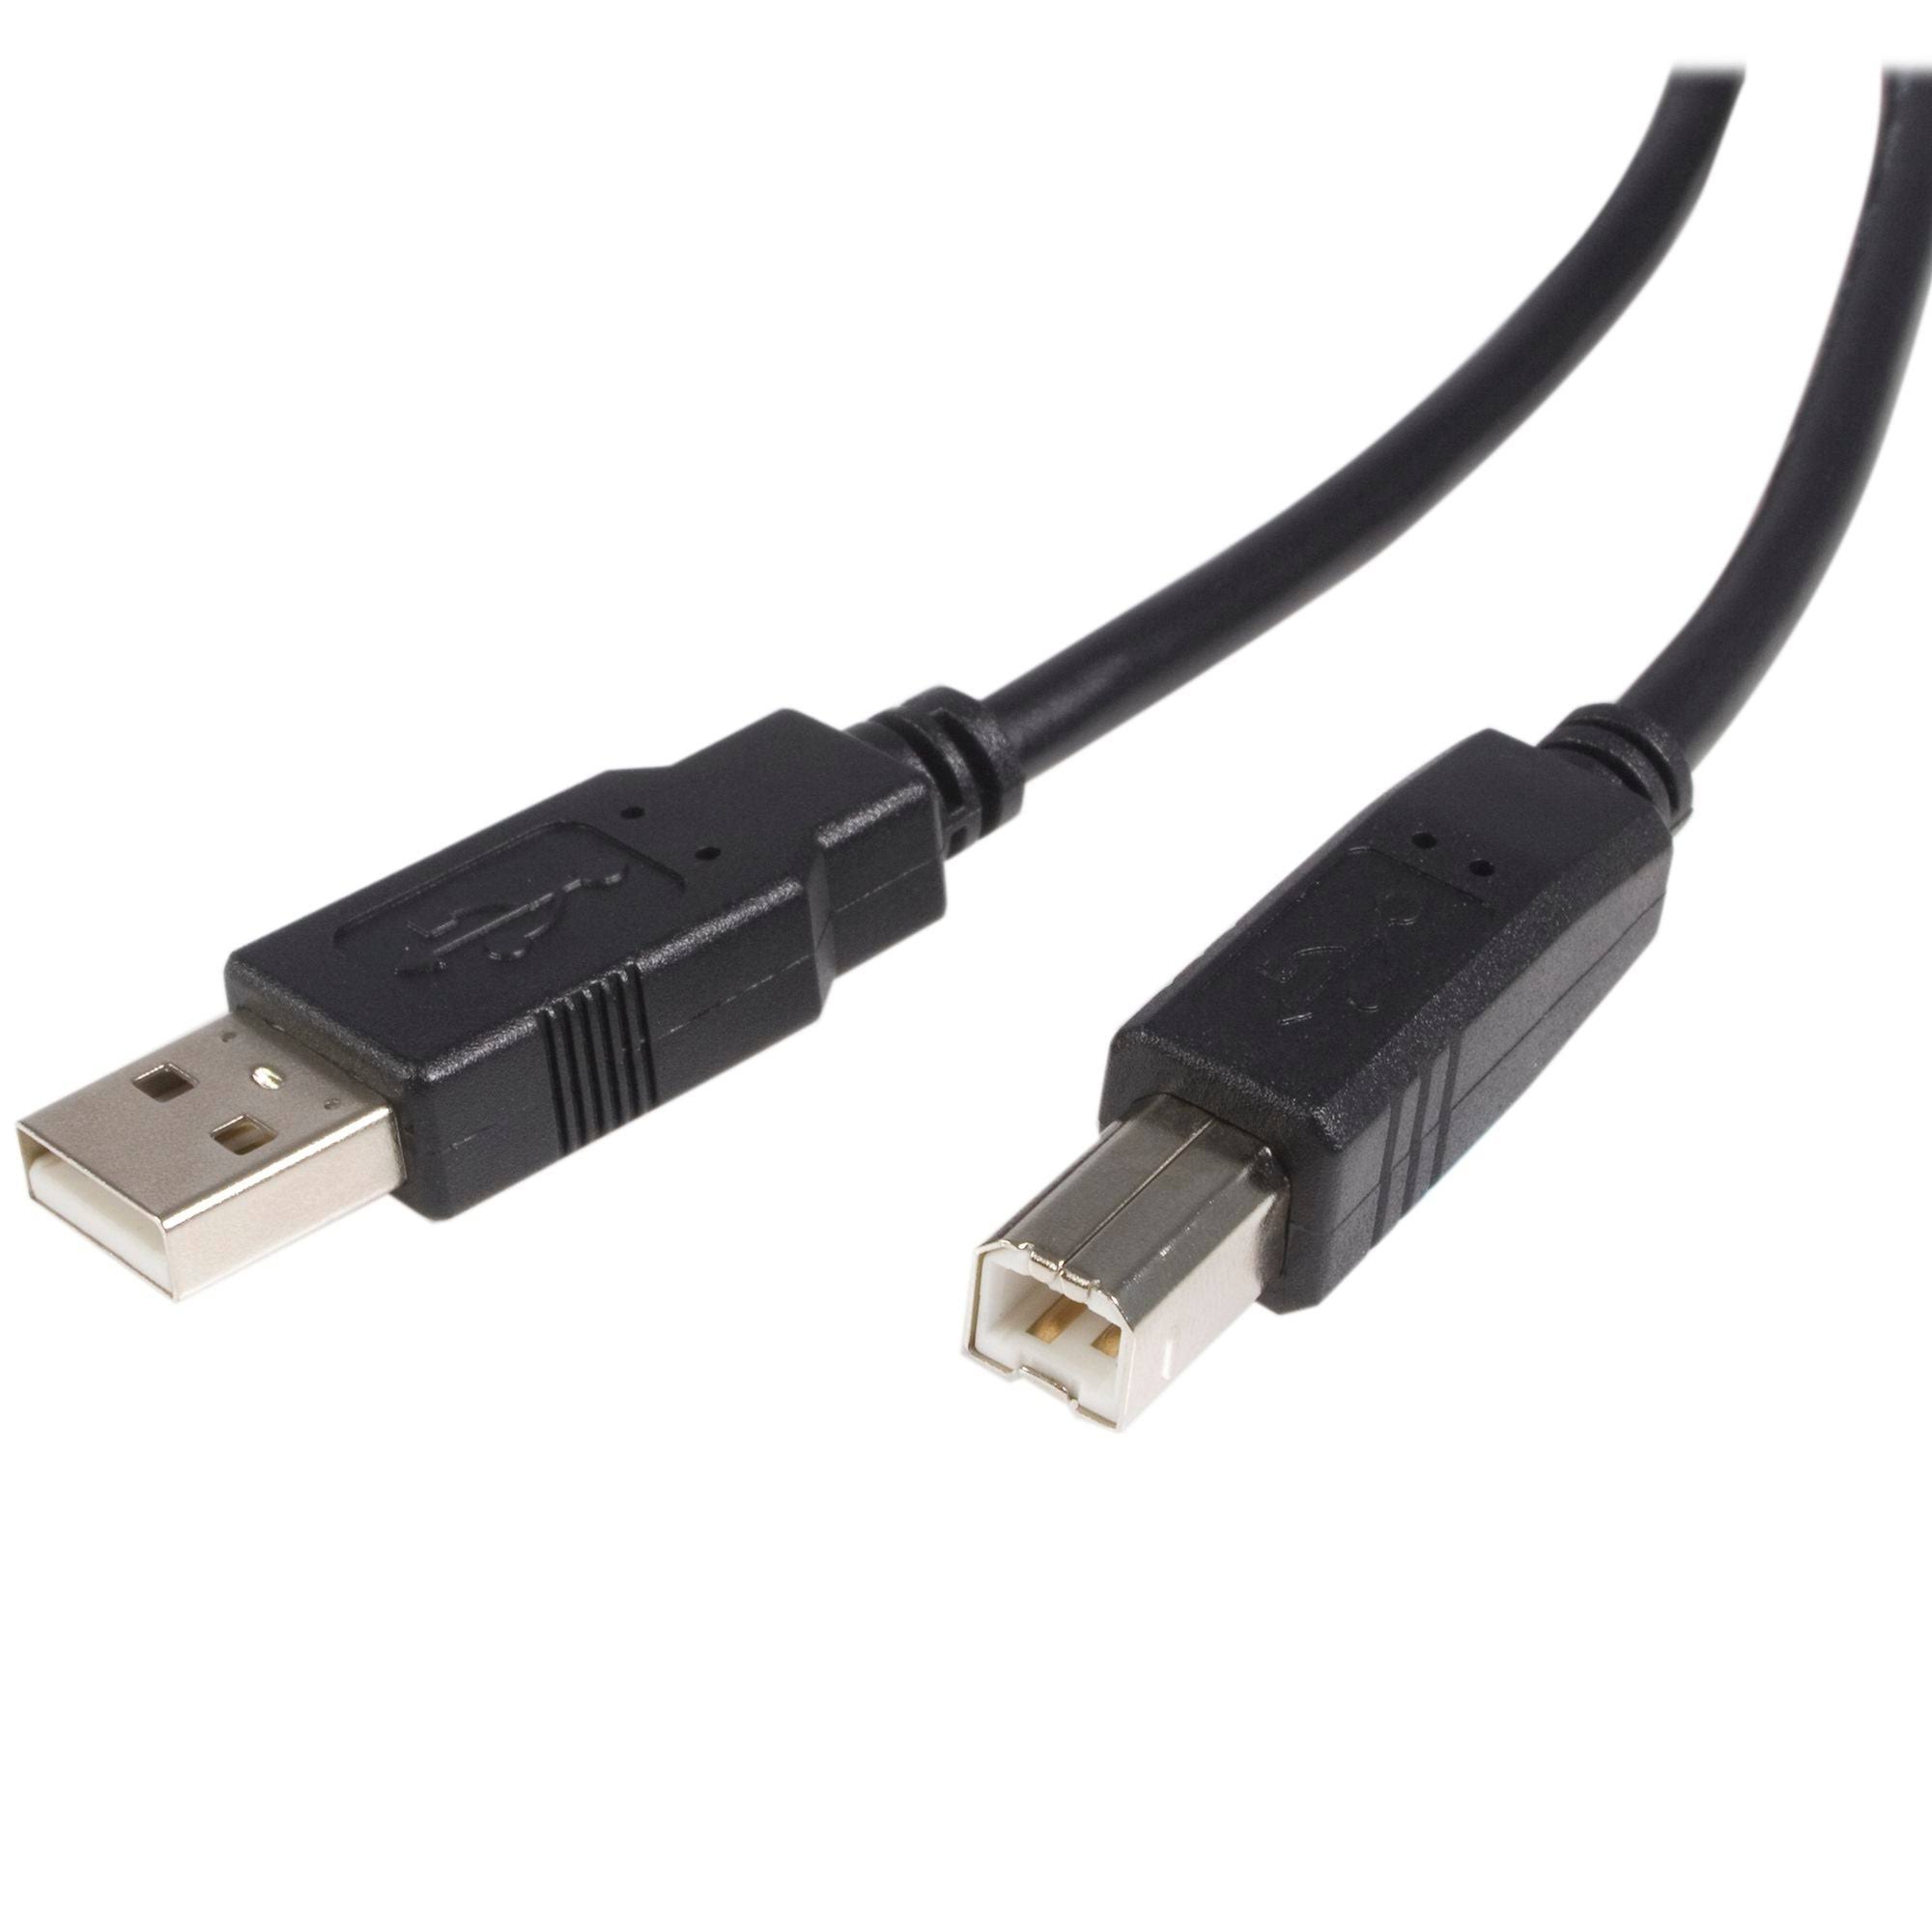 StarTech USB 2.0 Certified A to B Cable - 3ft